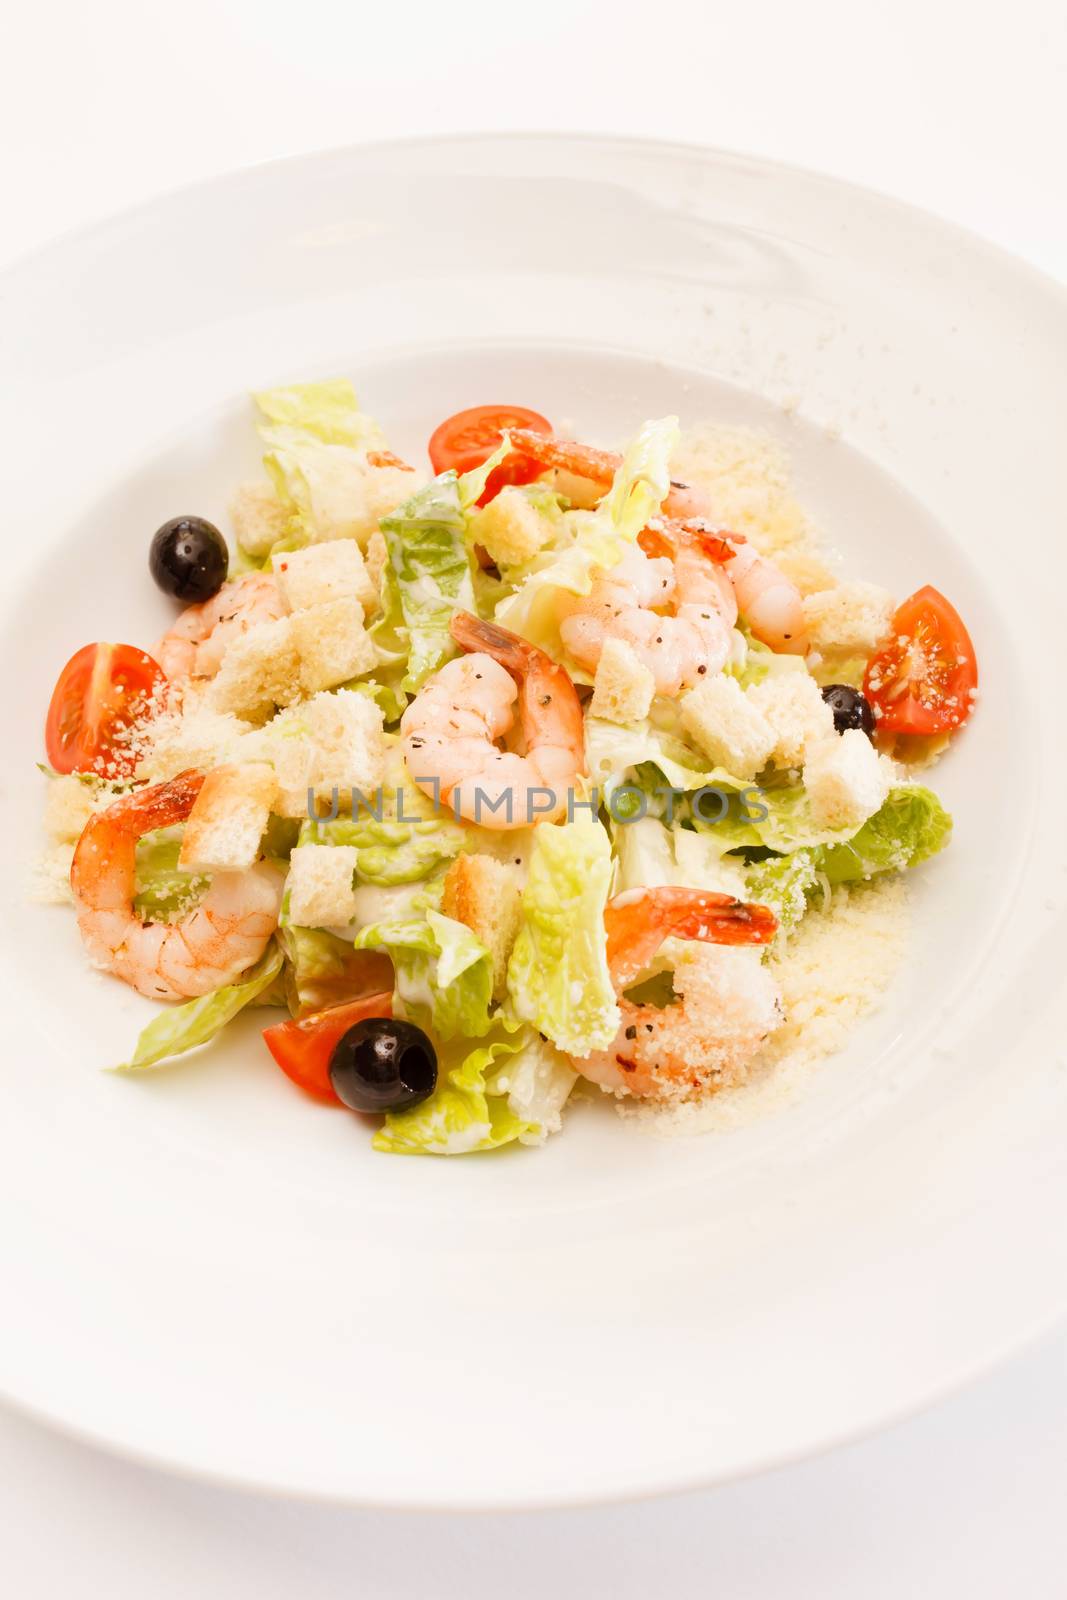 caesar salad with shrimps by shebeko